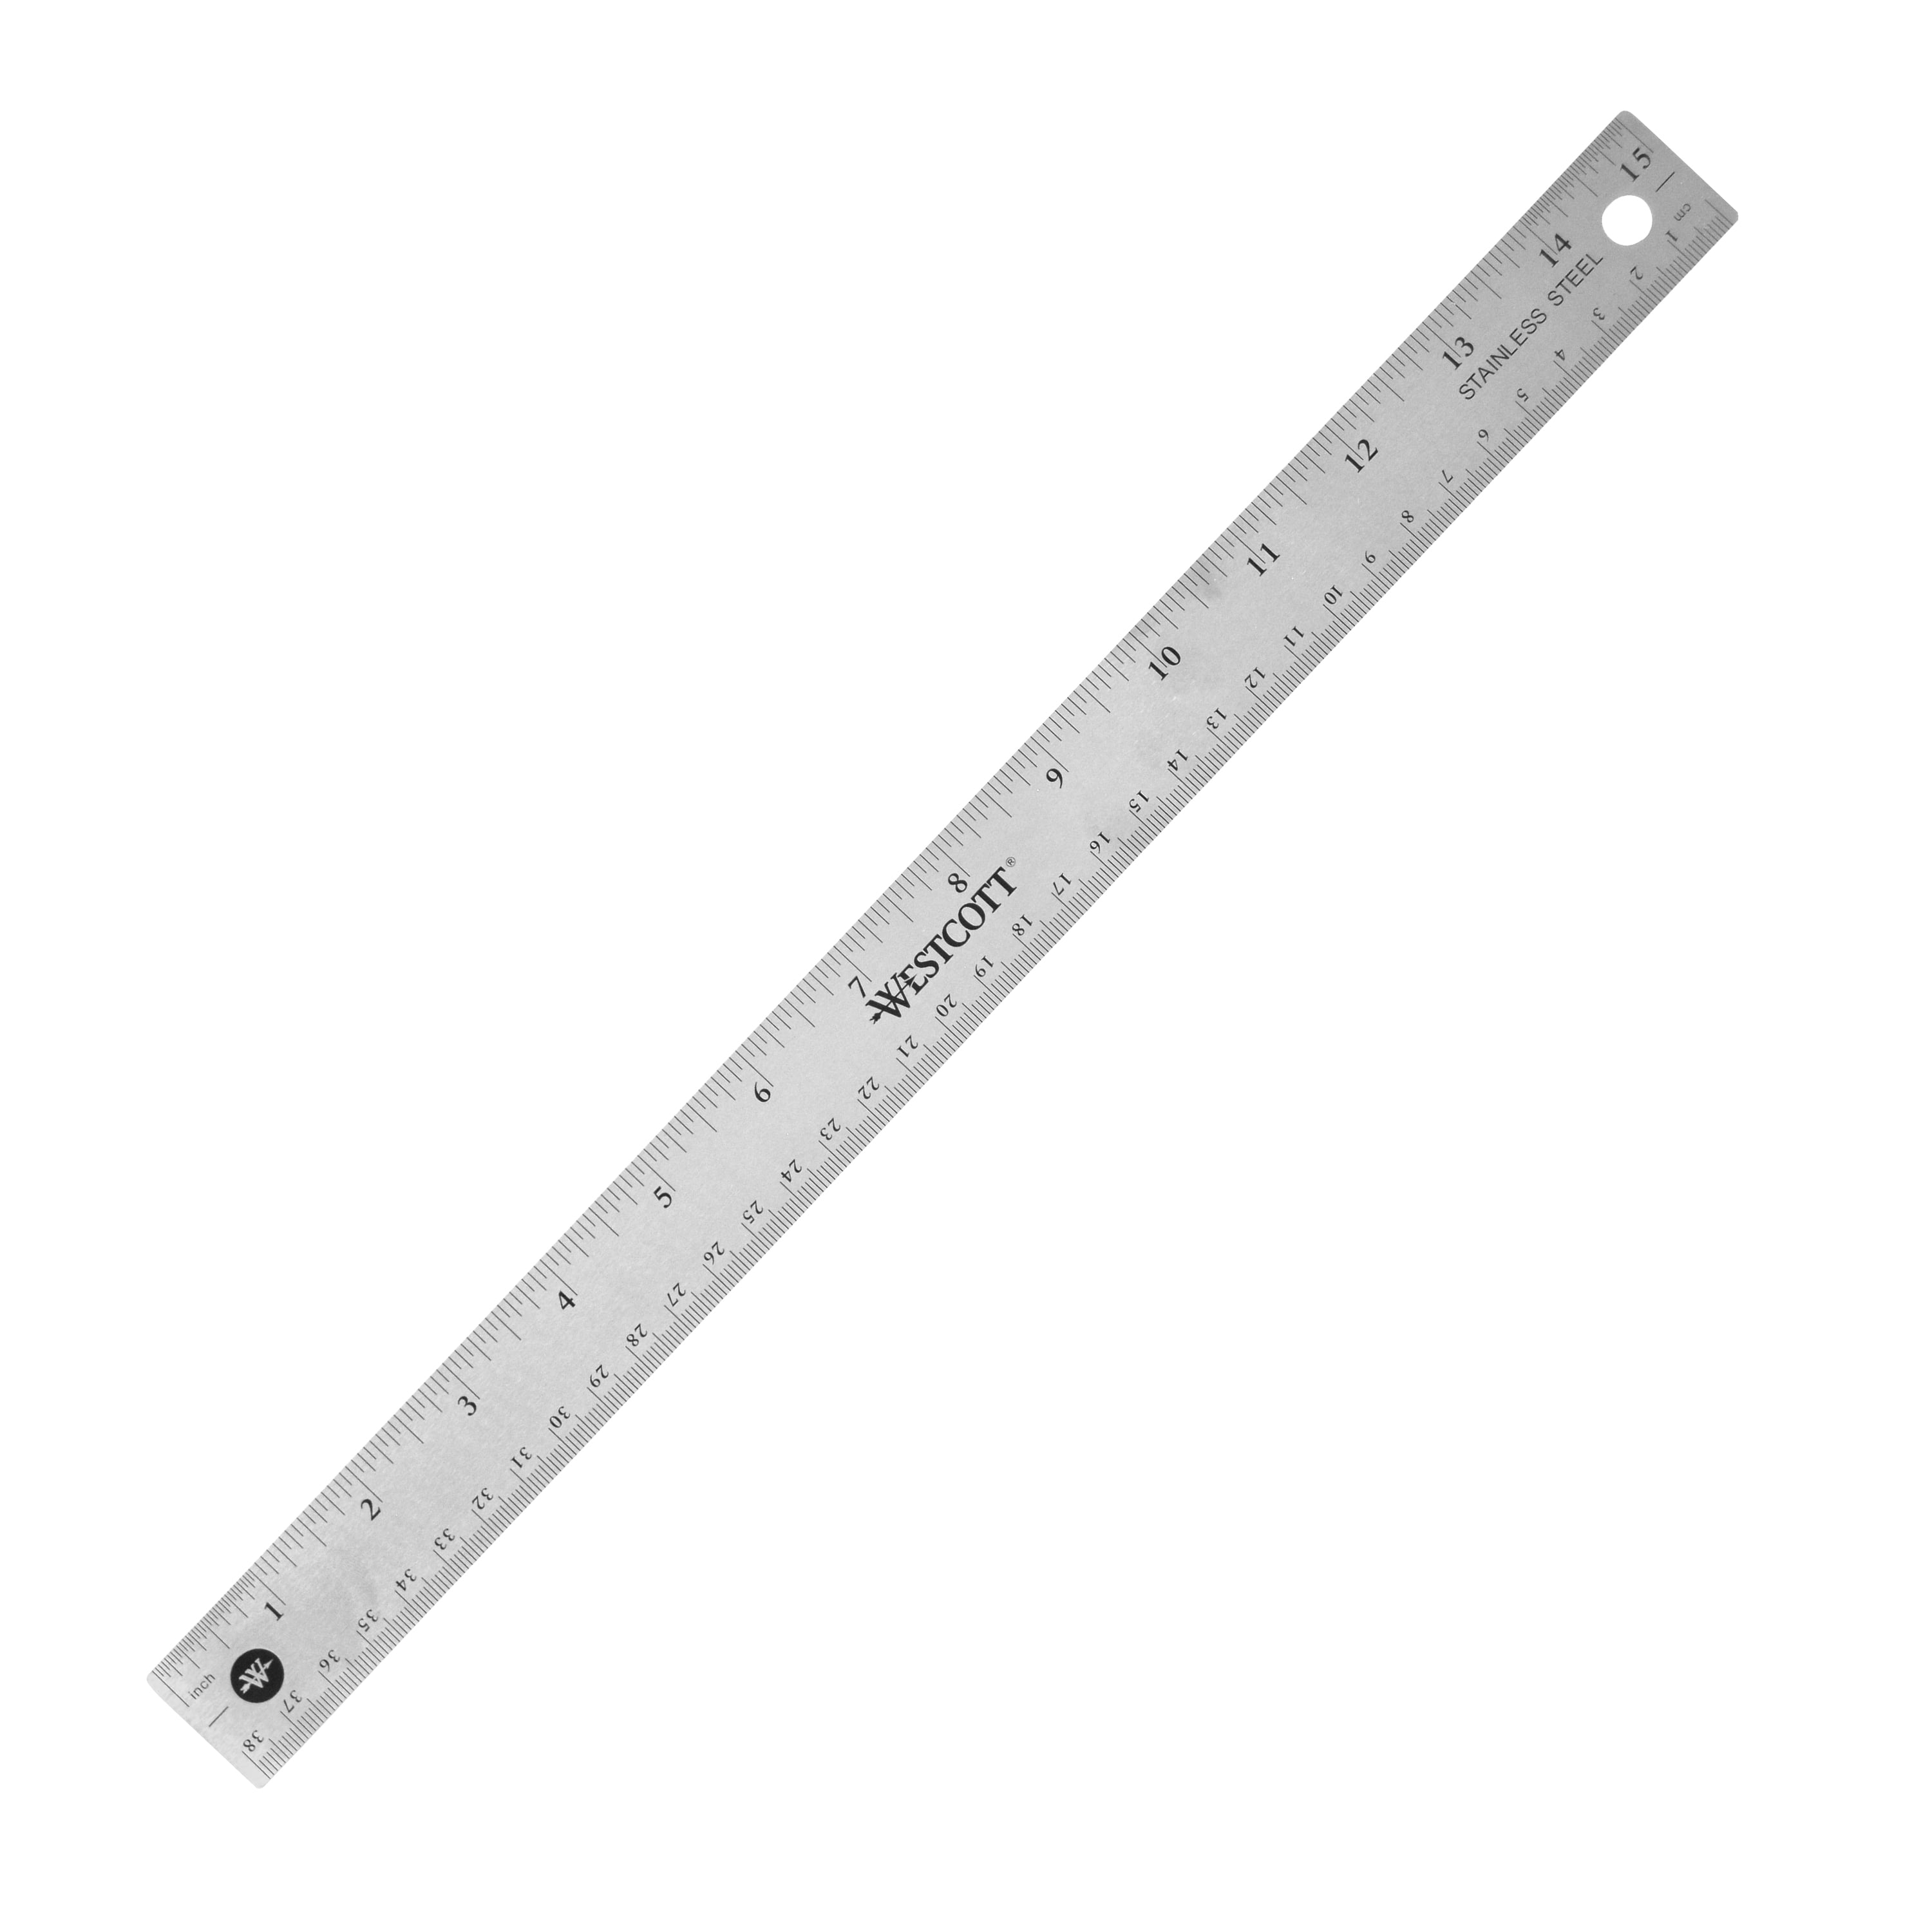  Westcott 13862 Flexible, Shatterproof Clear Ruler, 12 In :  Office And School Rulers : Office Products